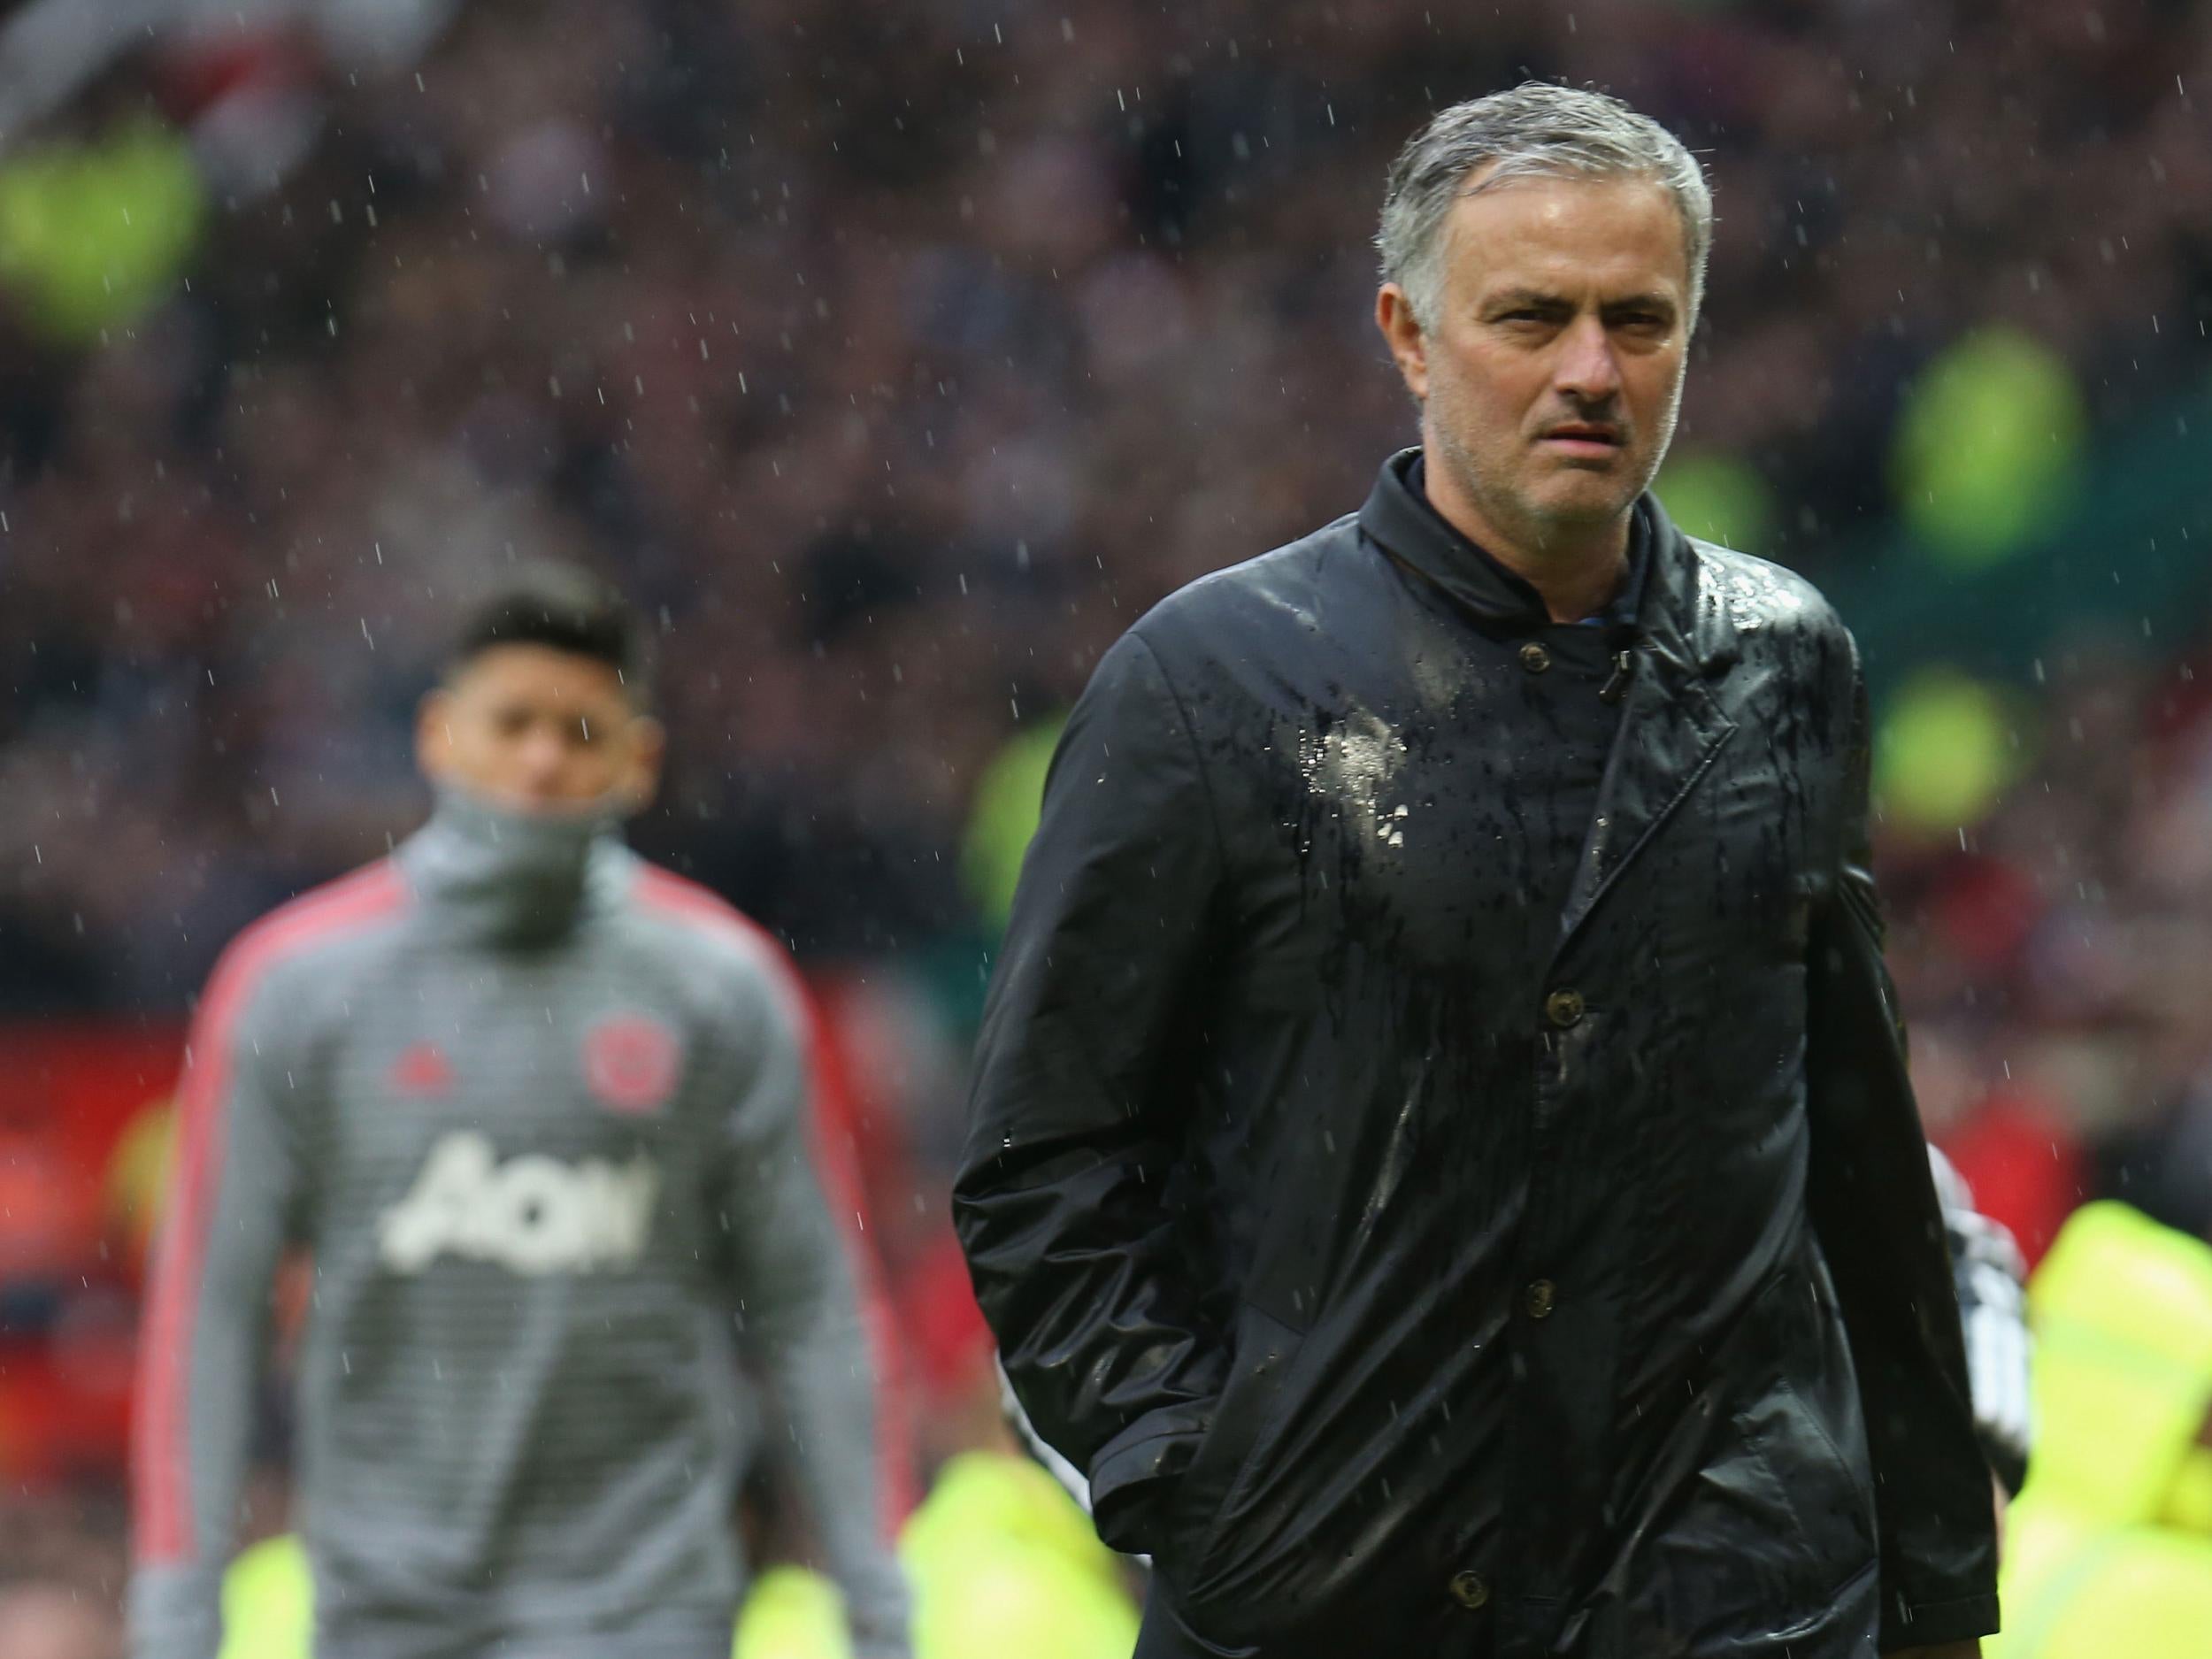 Mourinho believes Manchester United must learn to be more consistent